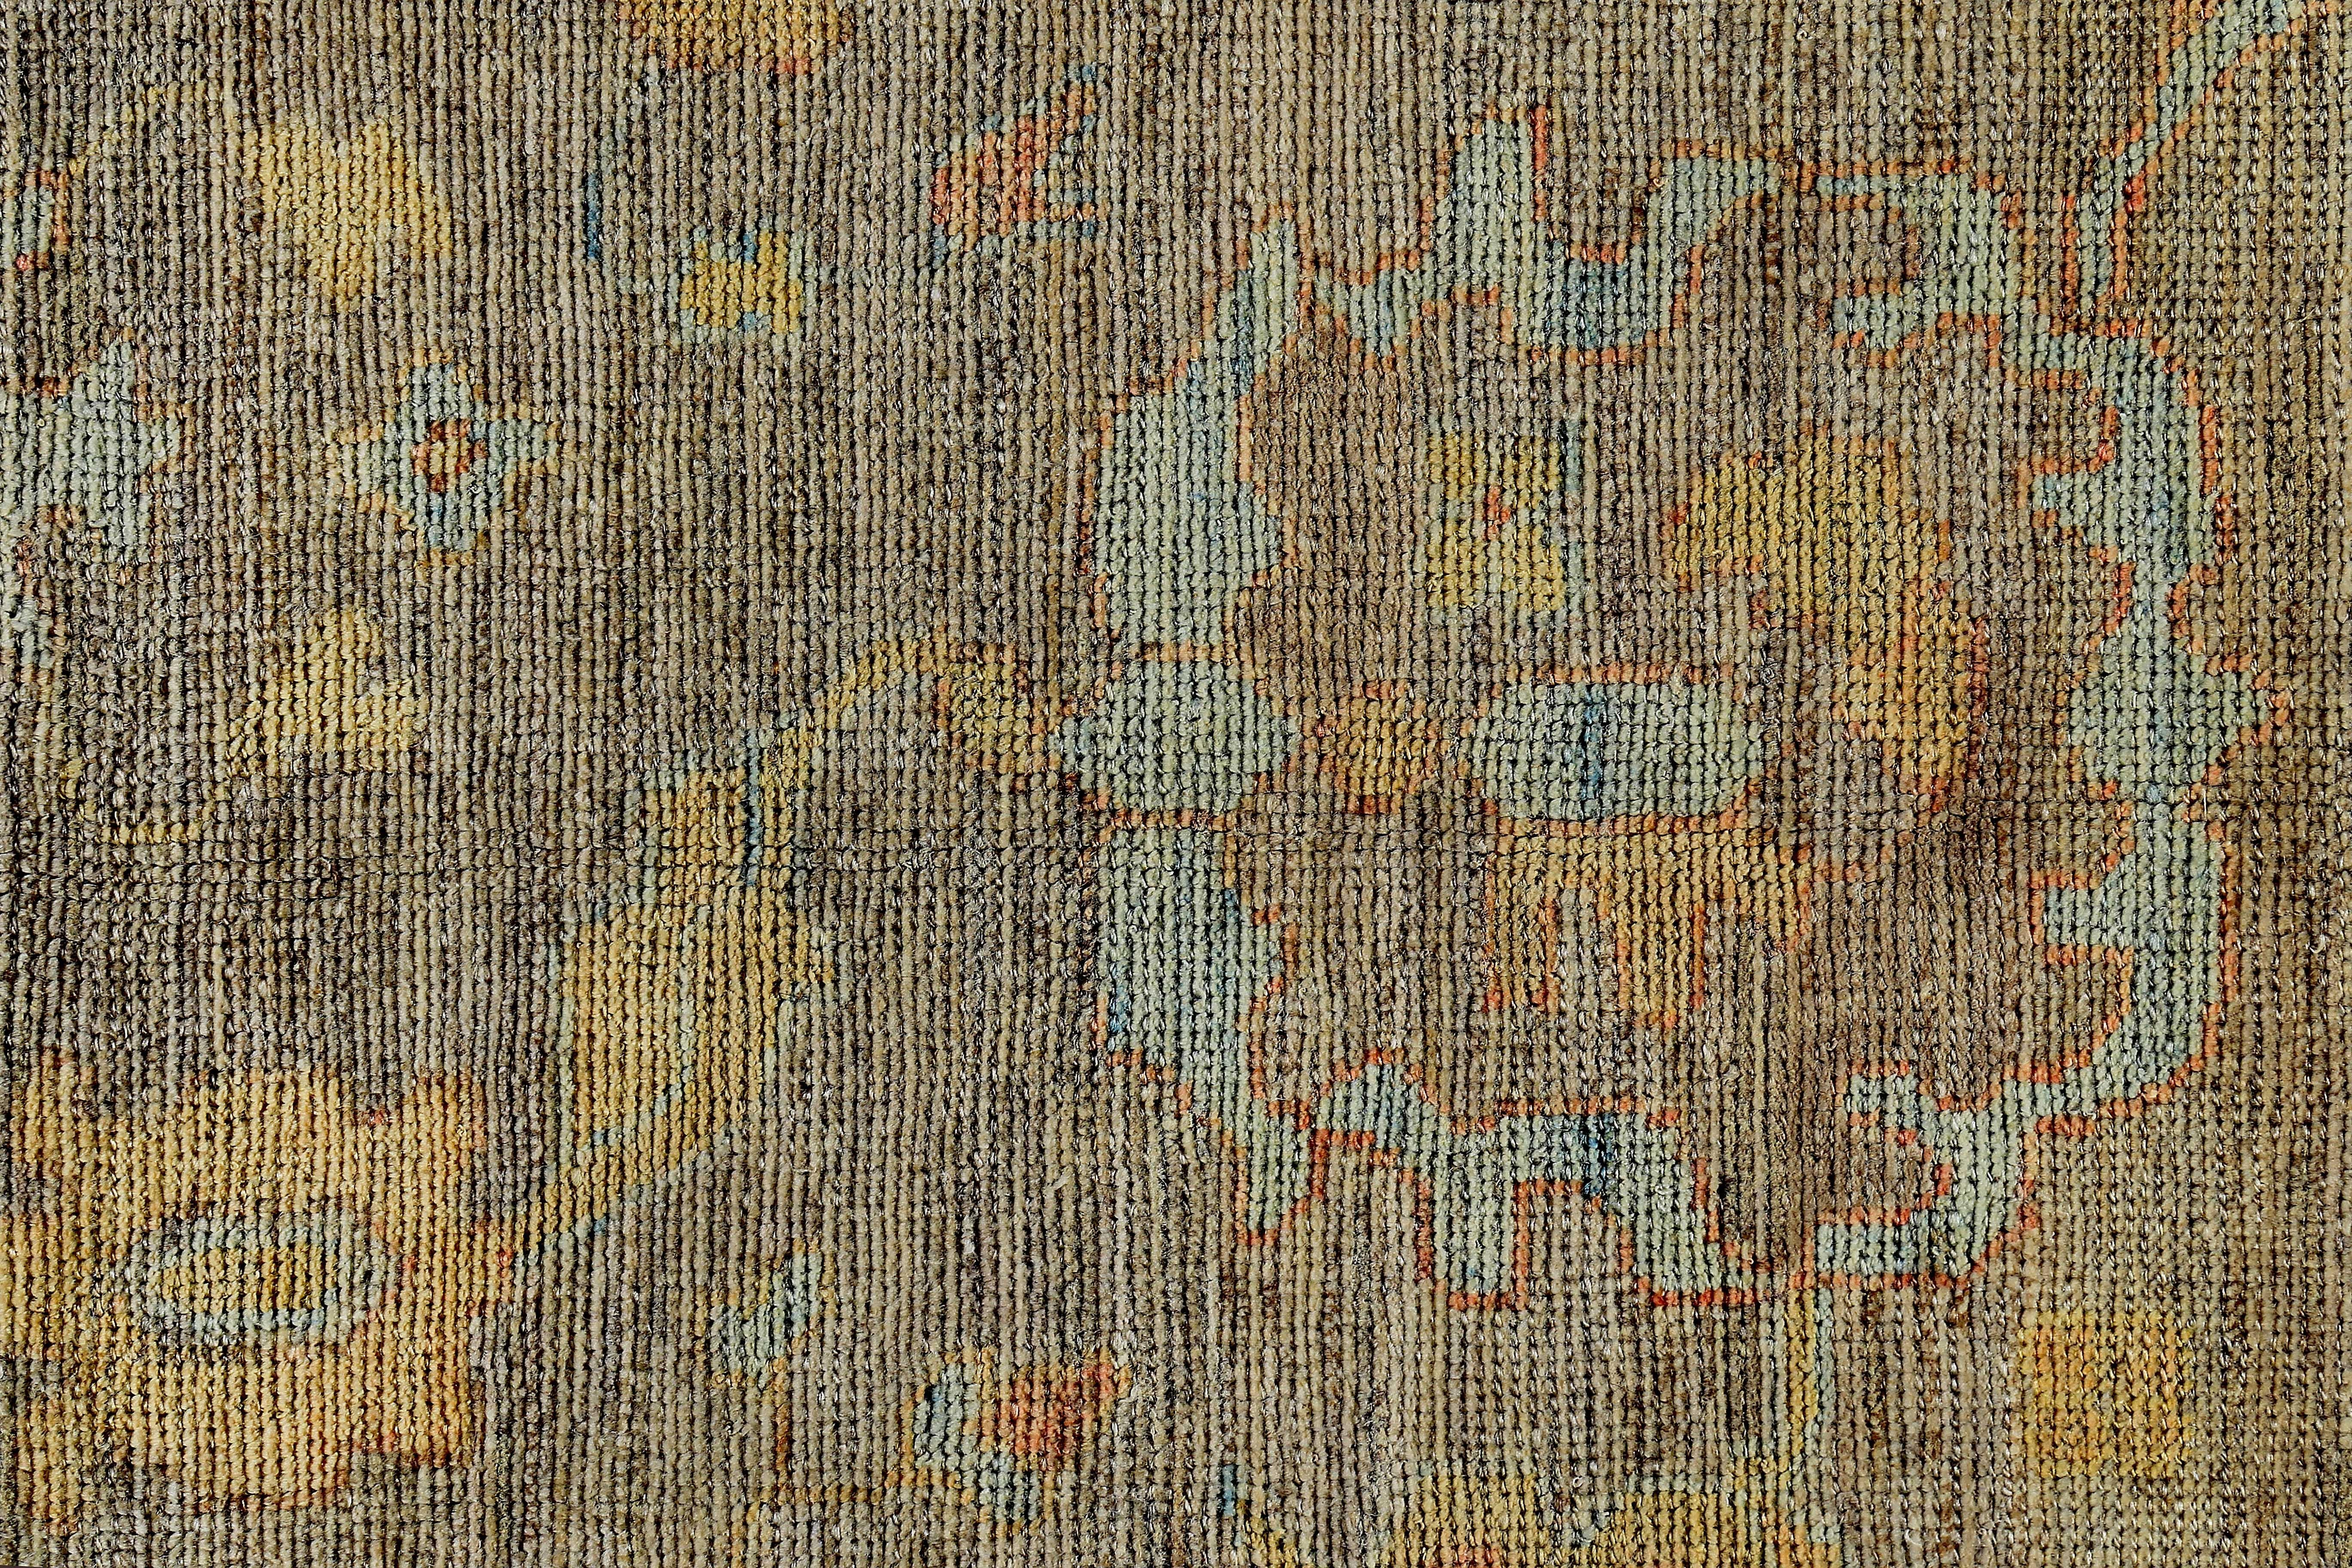 Hand-Woven Turkish Oushak Rug with Blue and Gold Floral Patterns on Ivory and Brown Field For Sale